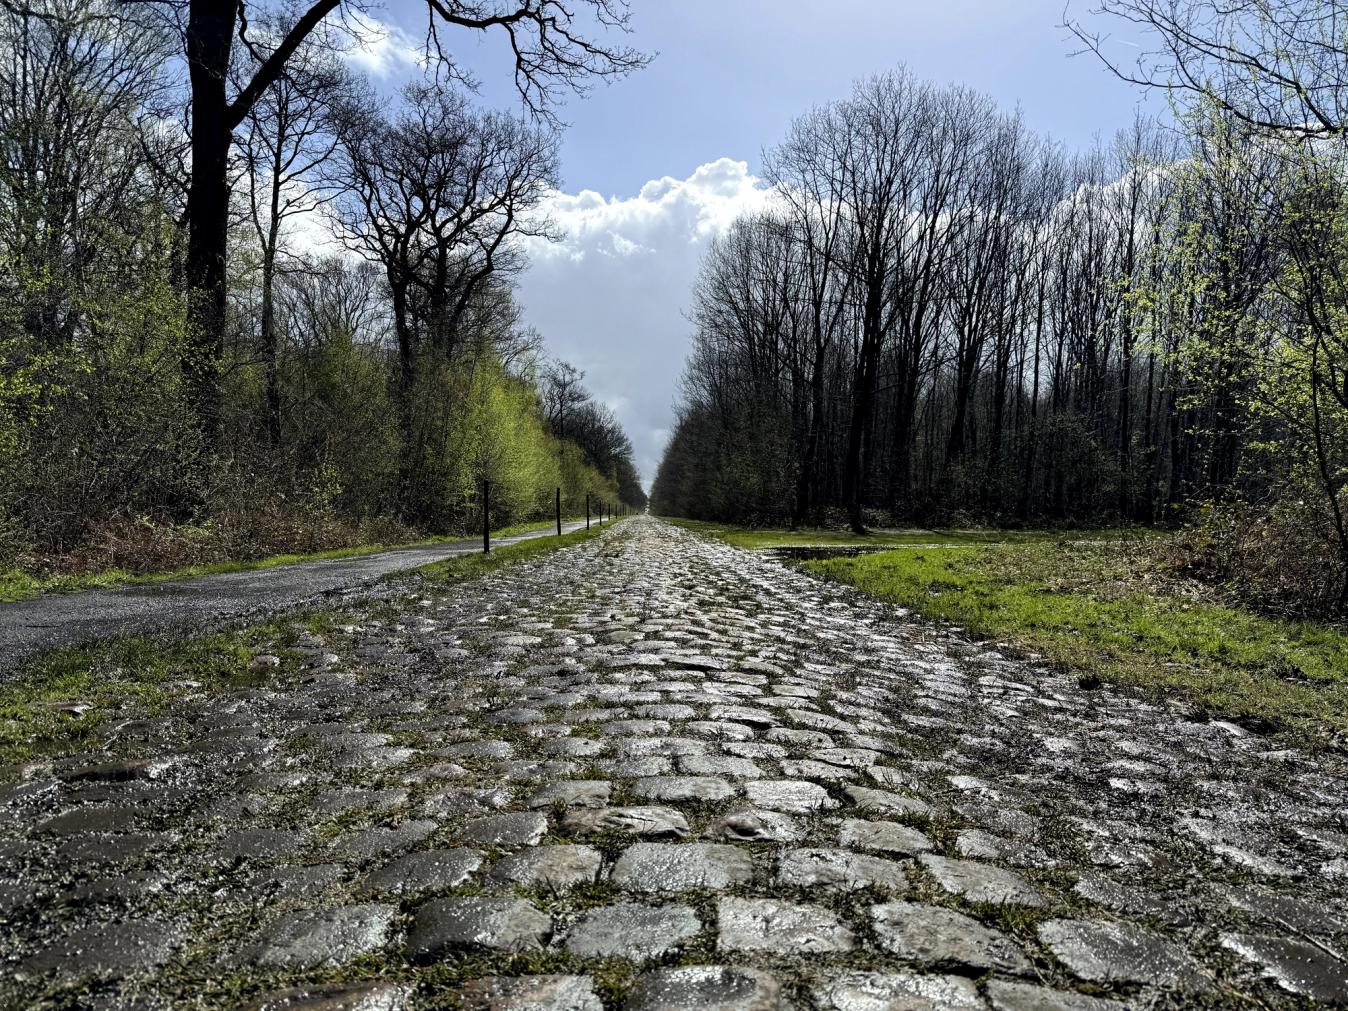 Discovered by Jean Stablinski as he worked in the nearby mineshaft, Arenberg's fearsome cobbles were introduced to Paris-Roubaix in 1968